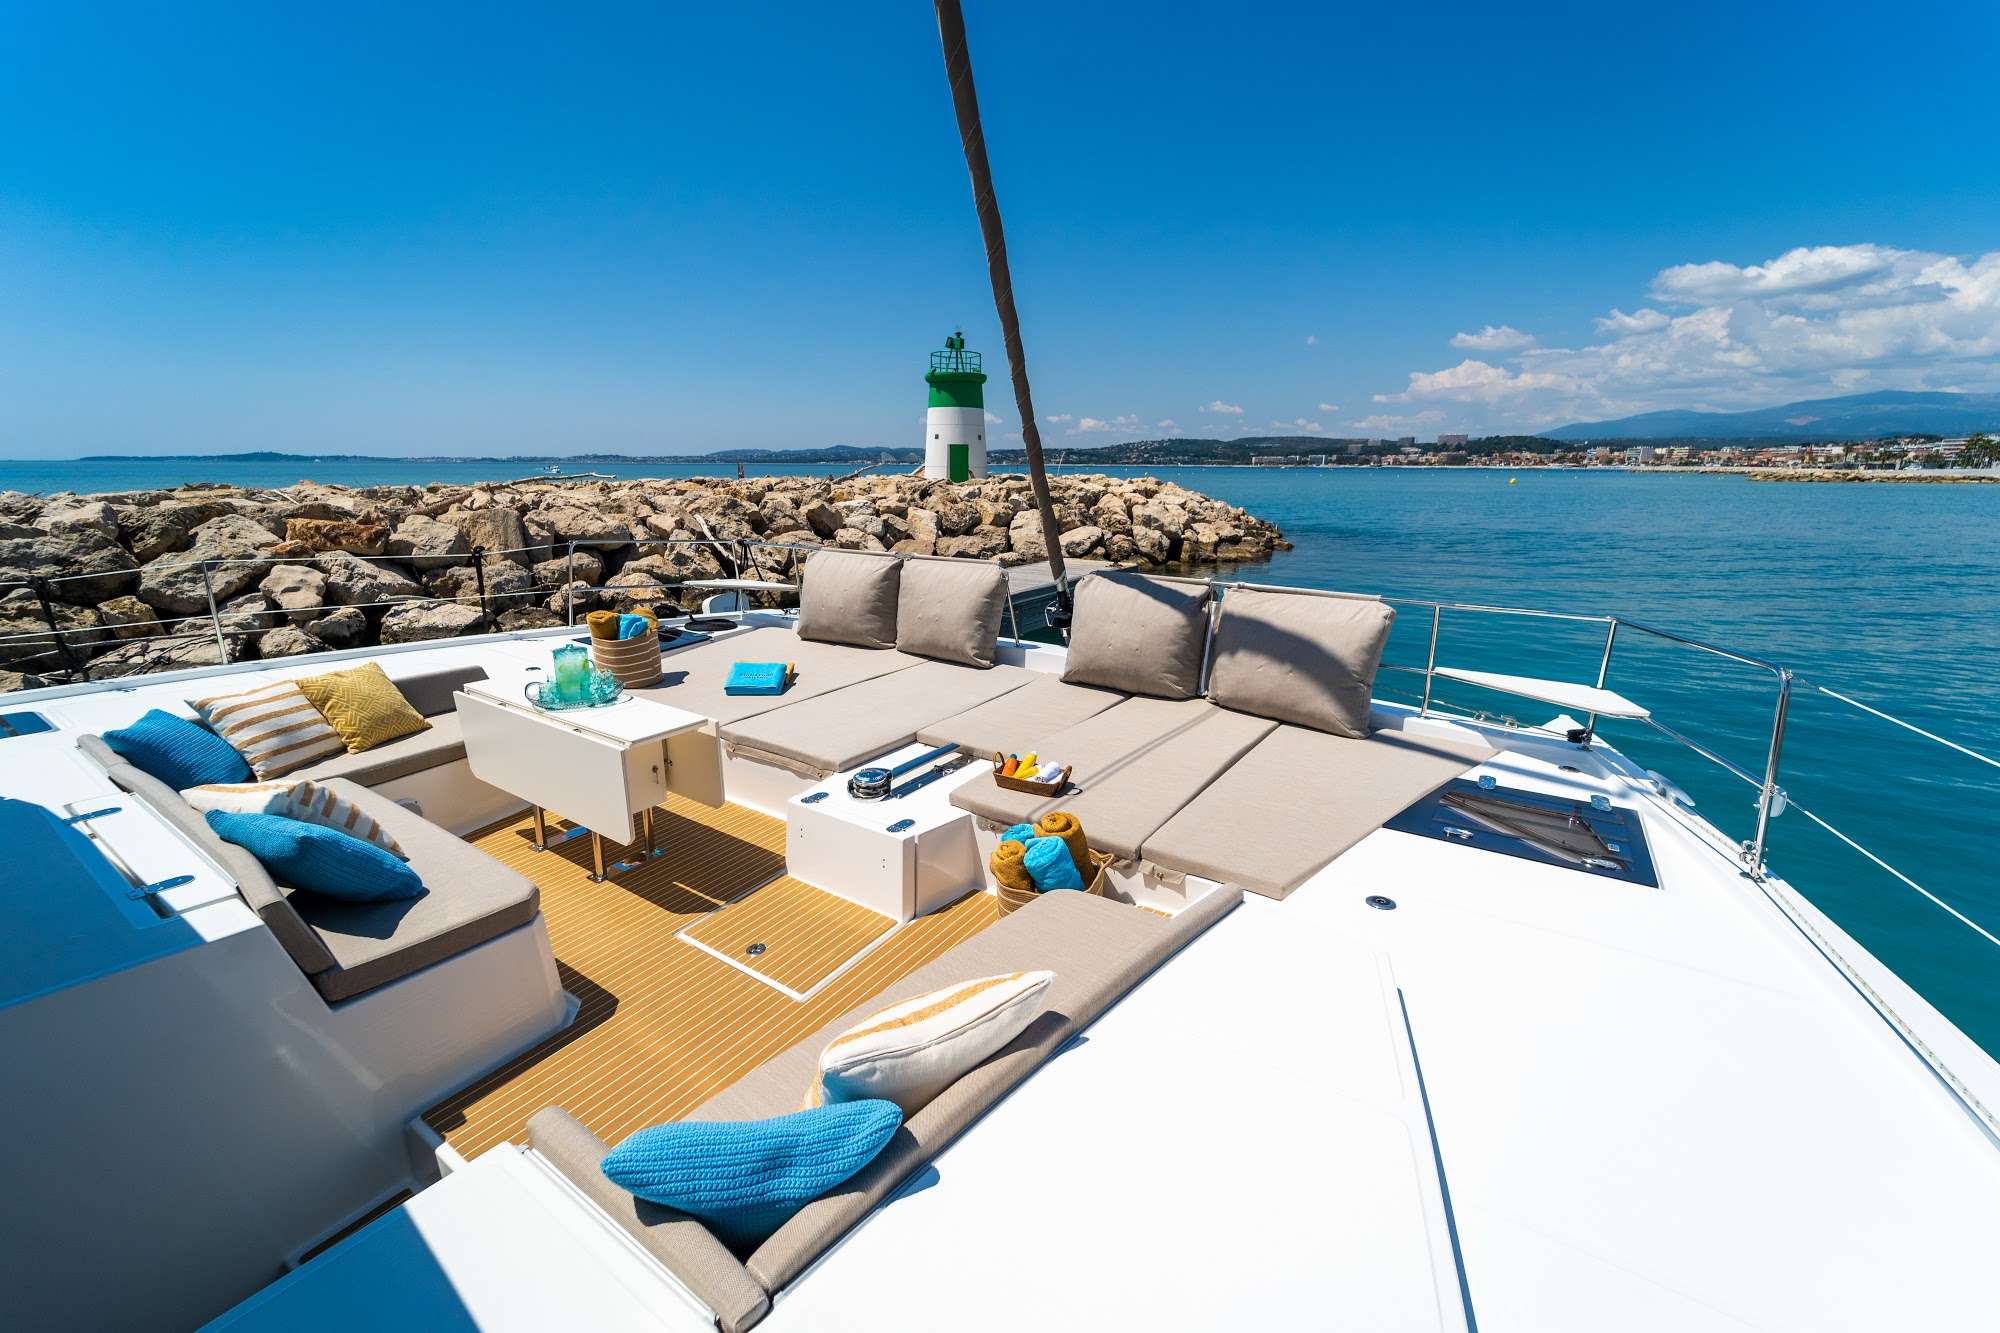 Signature Vision - Yacht Charter Taranto & Boat hire in Europe (Spain, France, Italy) 4